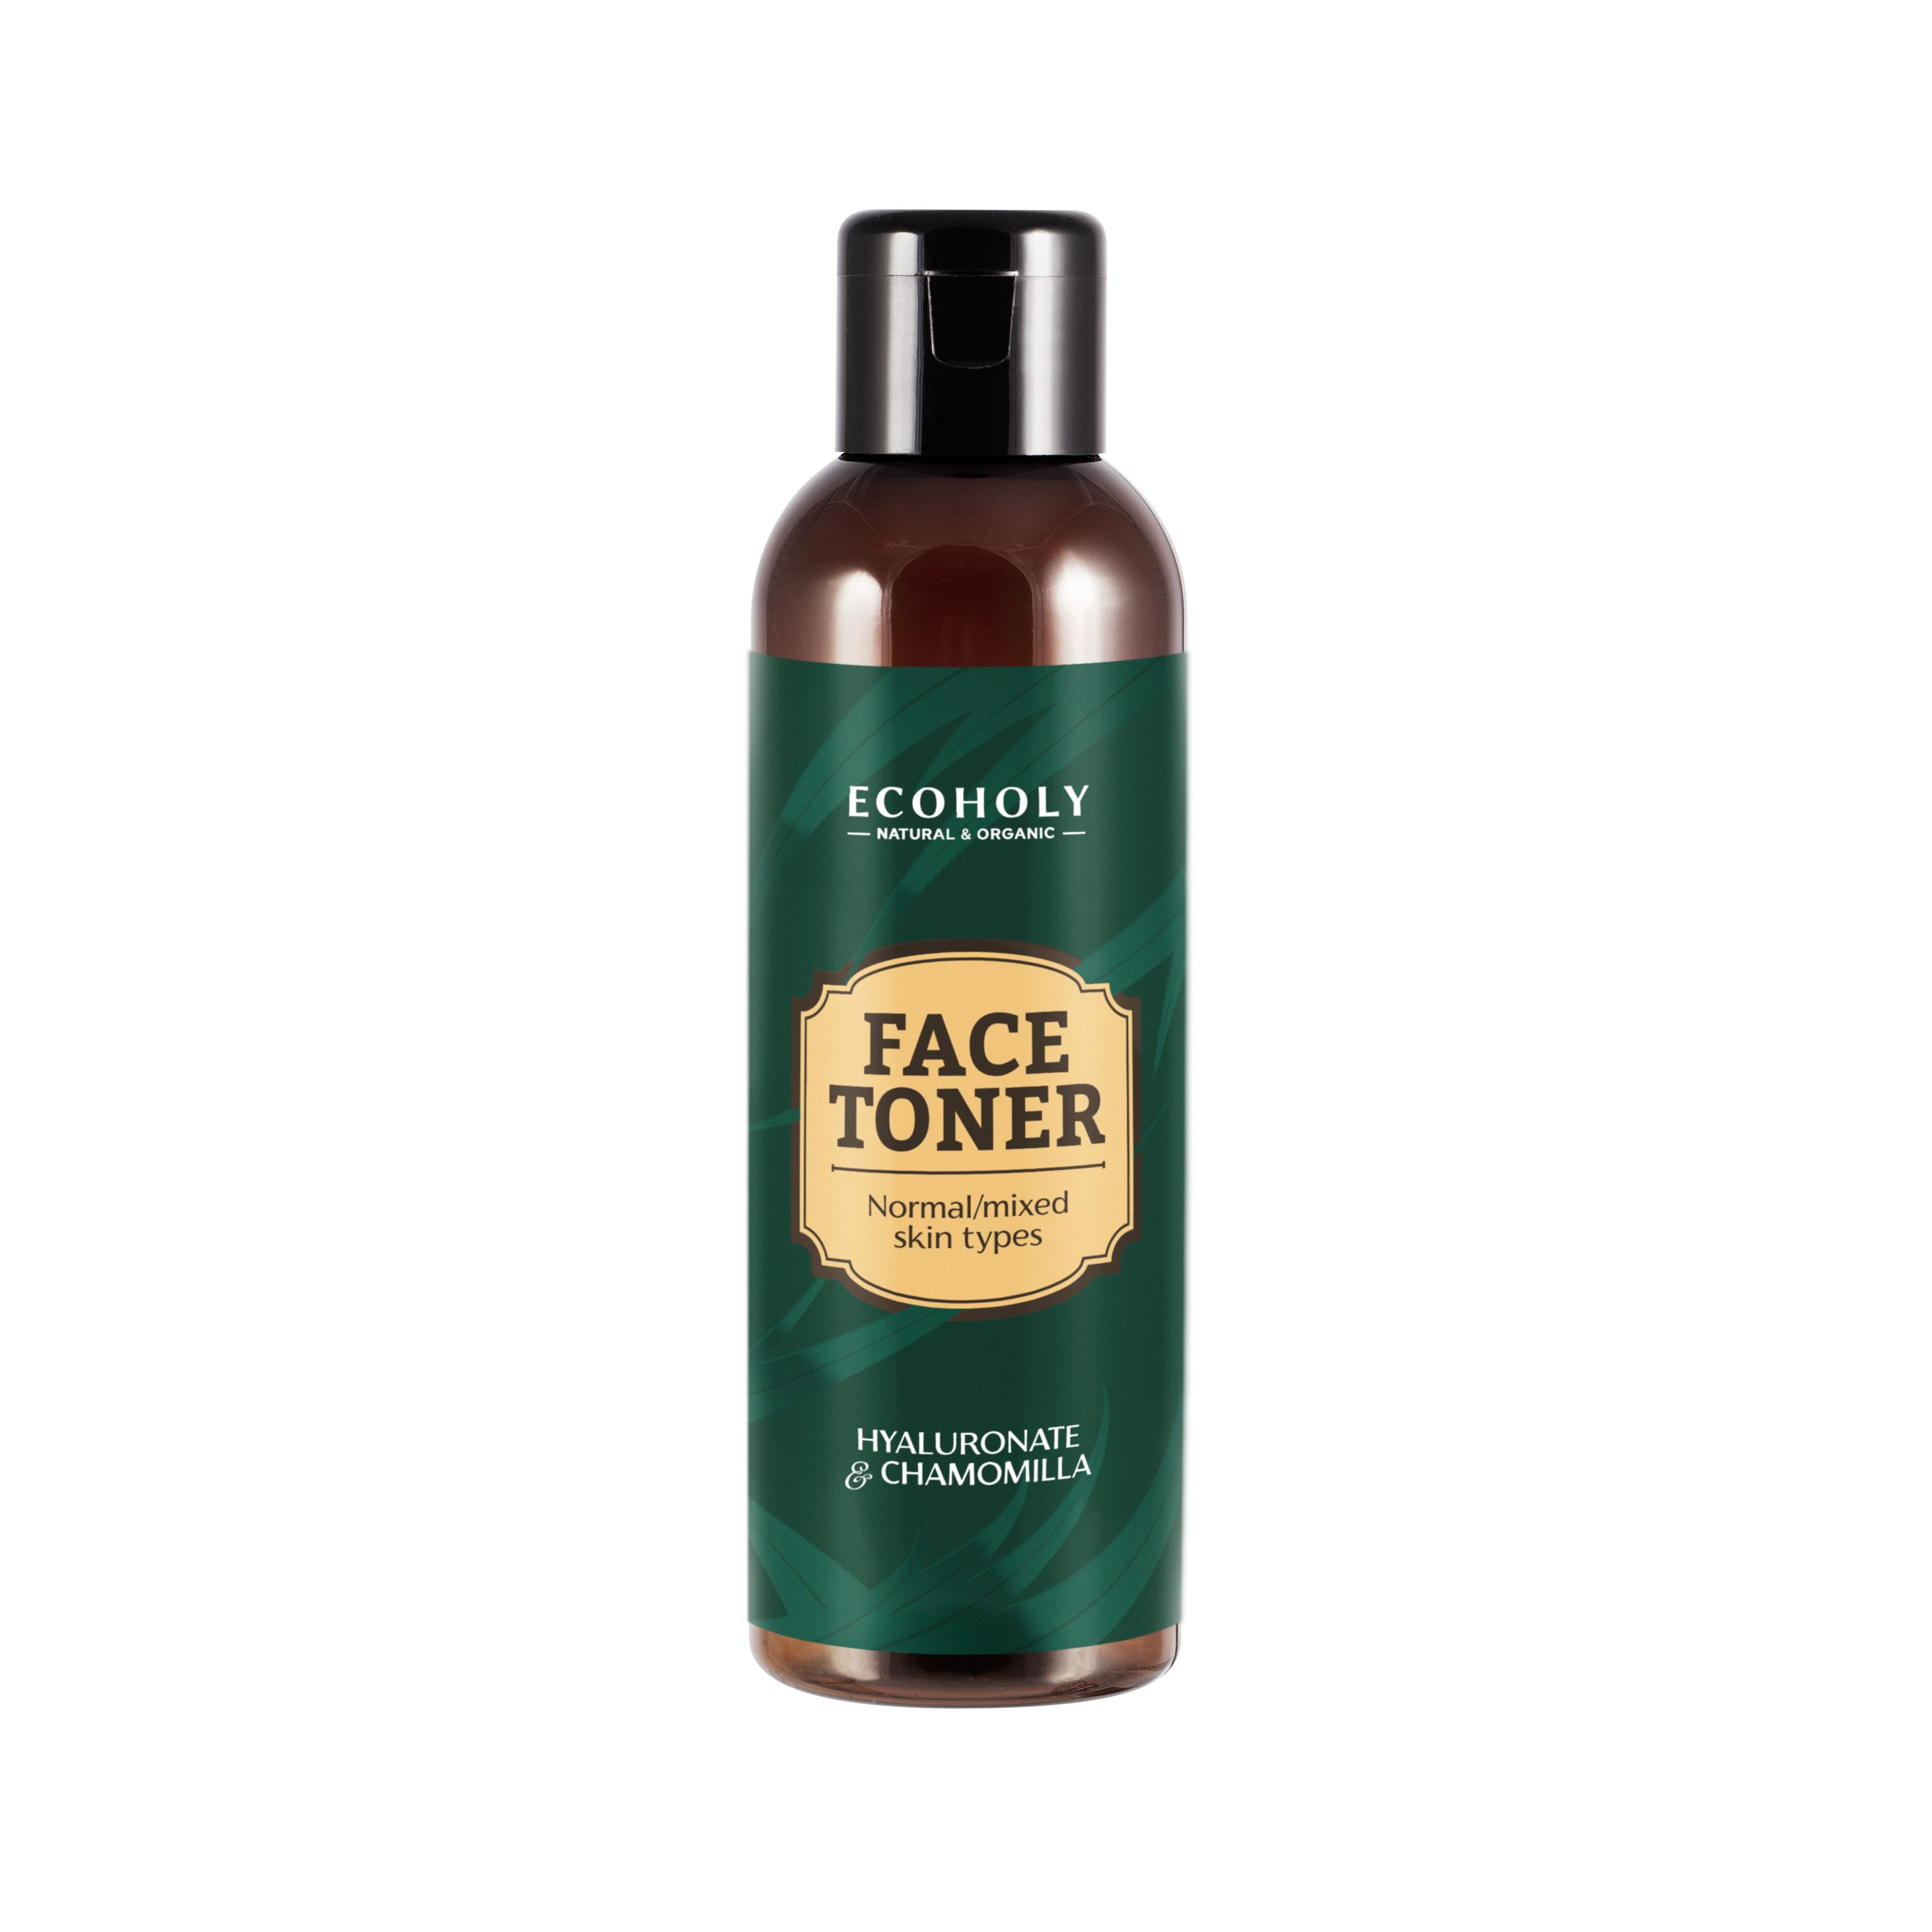 Face toner for normal / mixed skin